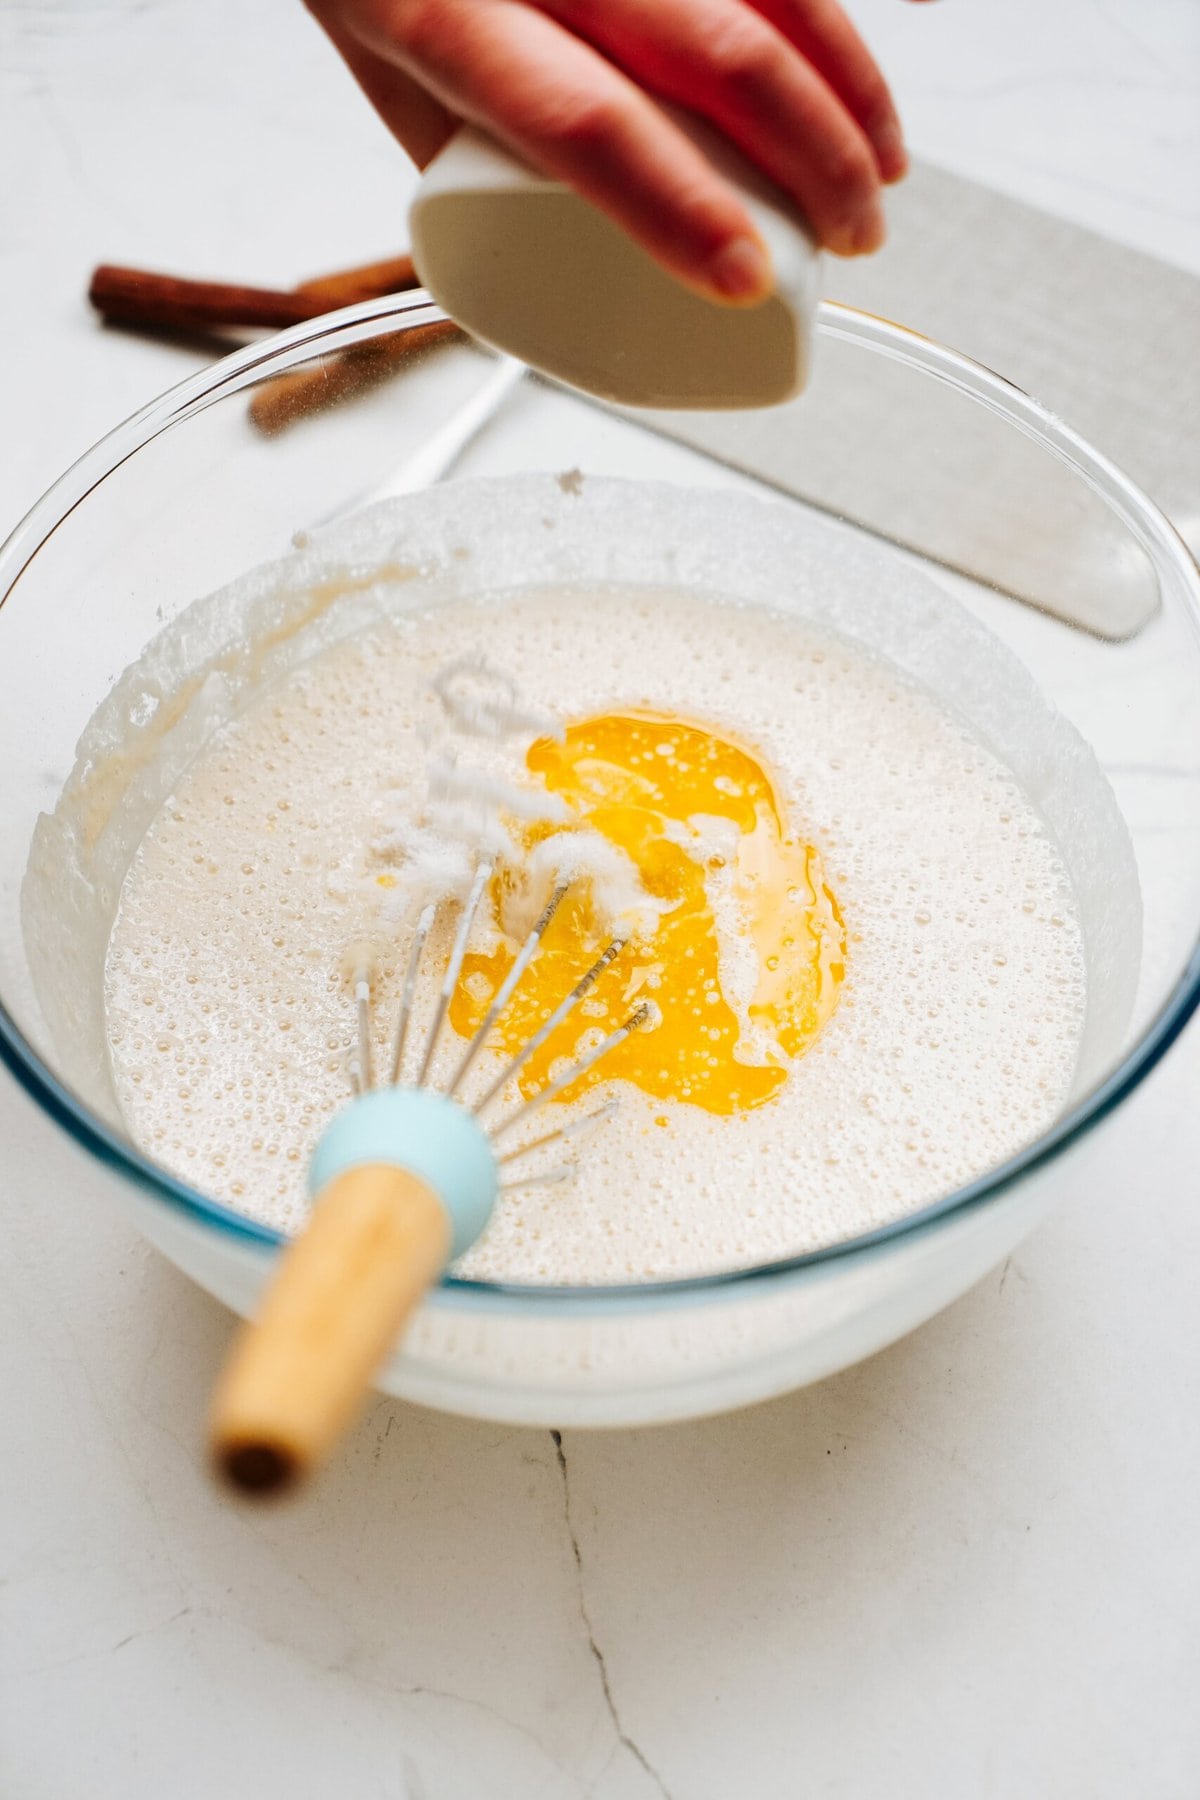 A hand is adding sugar from a small ceramic container into a glass bowl containing whisked eggs and flour, perfect for making cinnamon rolls. There is a whisk inside the bowl while a cinnamon stick and a grater lay on the counter.